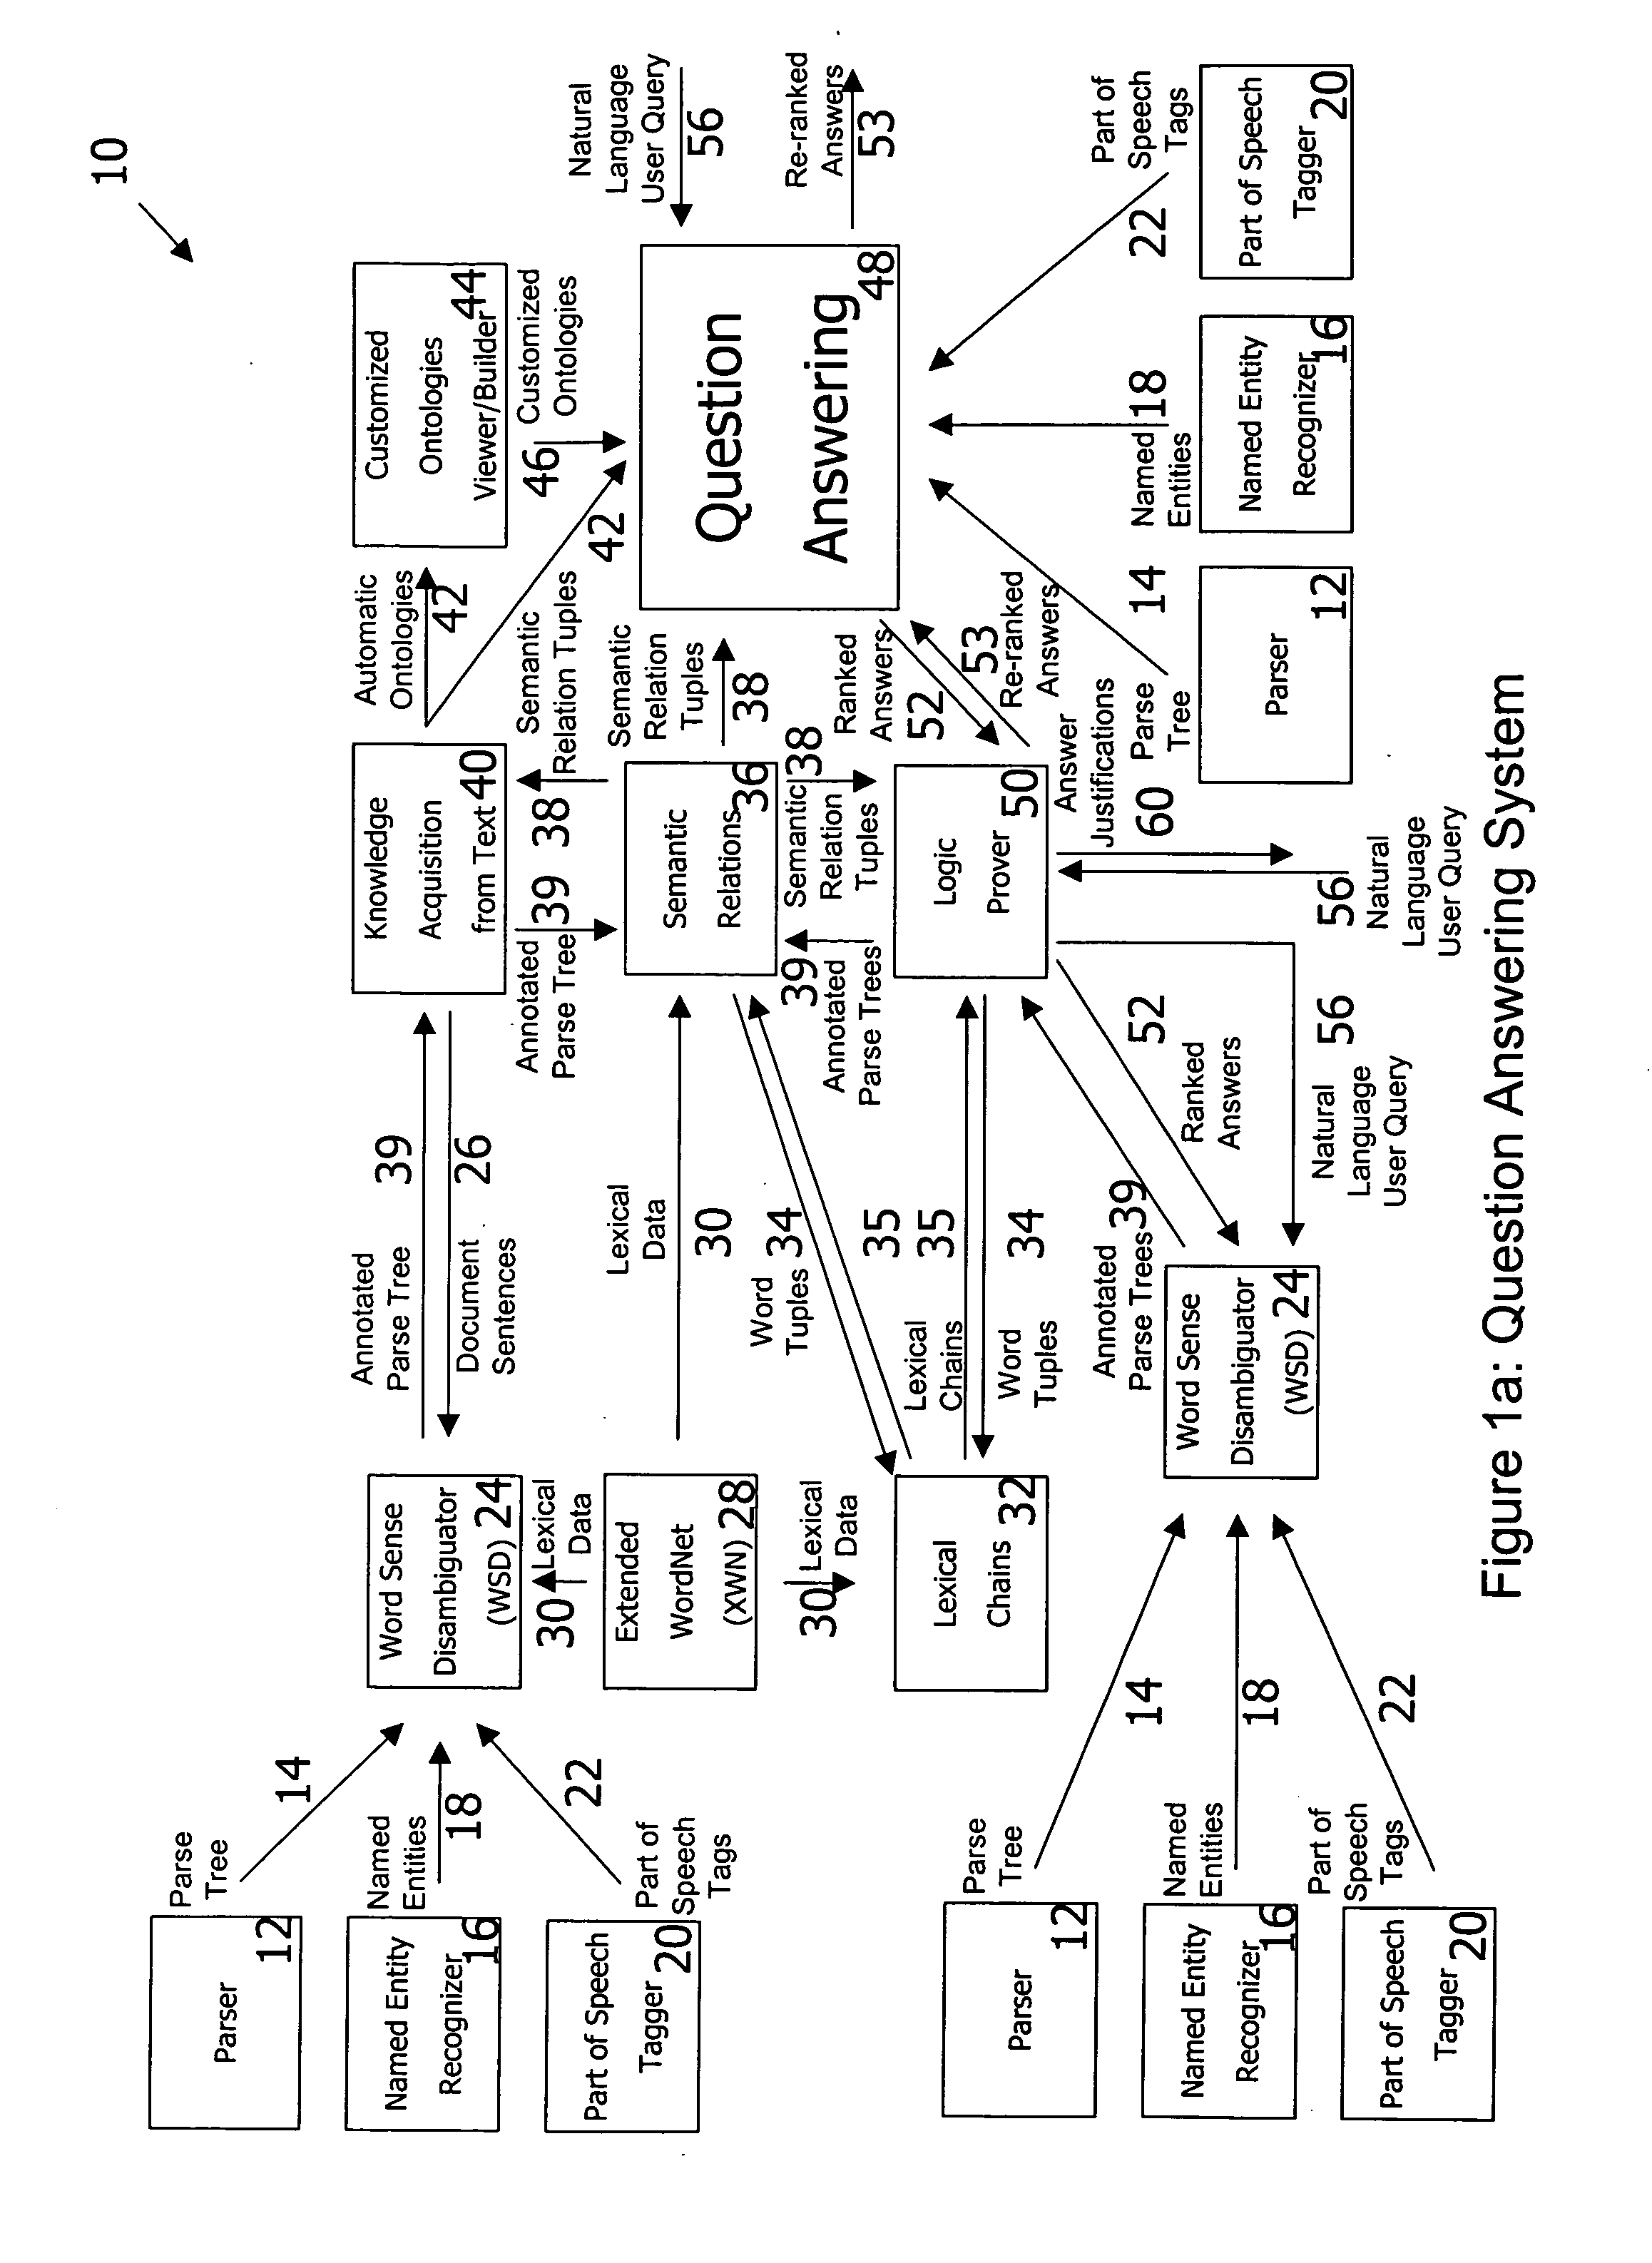 Natural language question answering system and method utilizing a logic prover